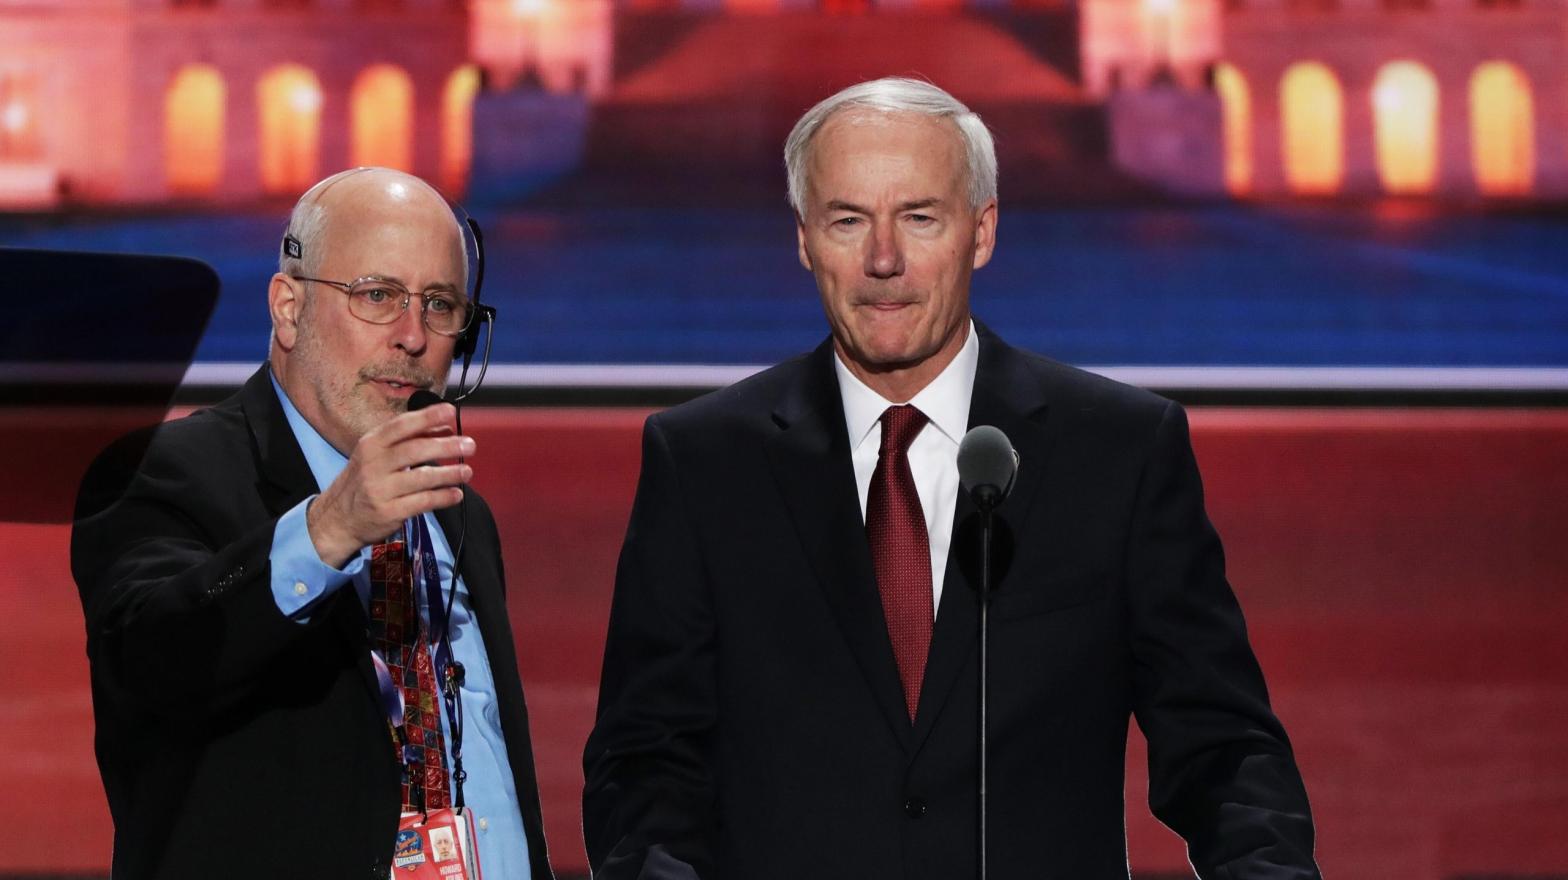 Arkansas Governor Asa Hutchinson, right, speaks at the Republican National Convention in July 2016 at Quicken Loans Arena in Cleveland, Ohio. (Photo: Alex Wong, Getty Images)